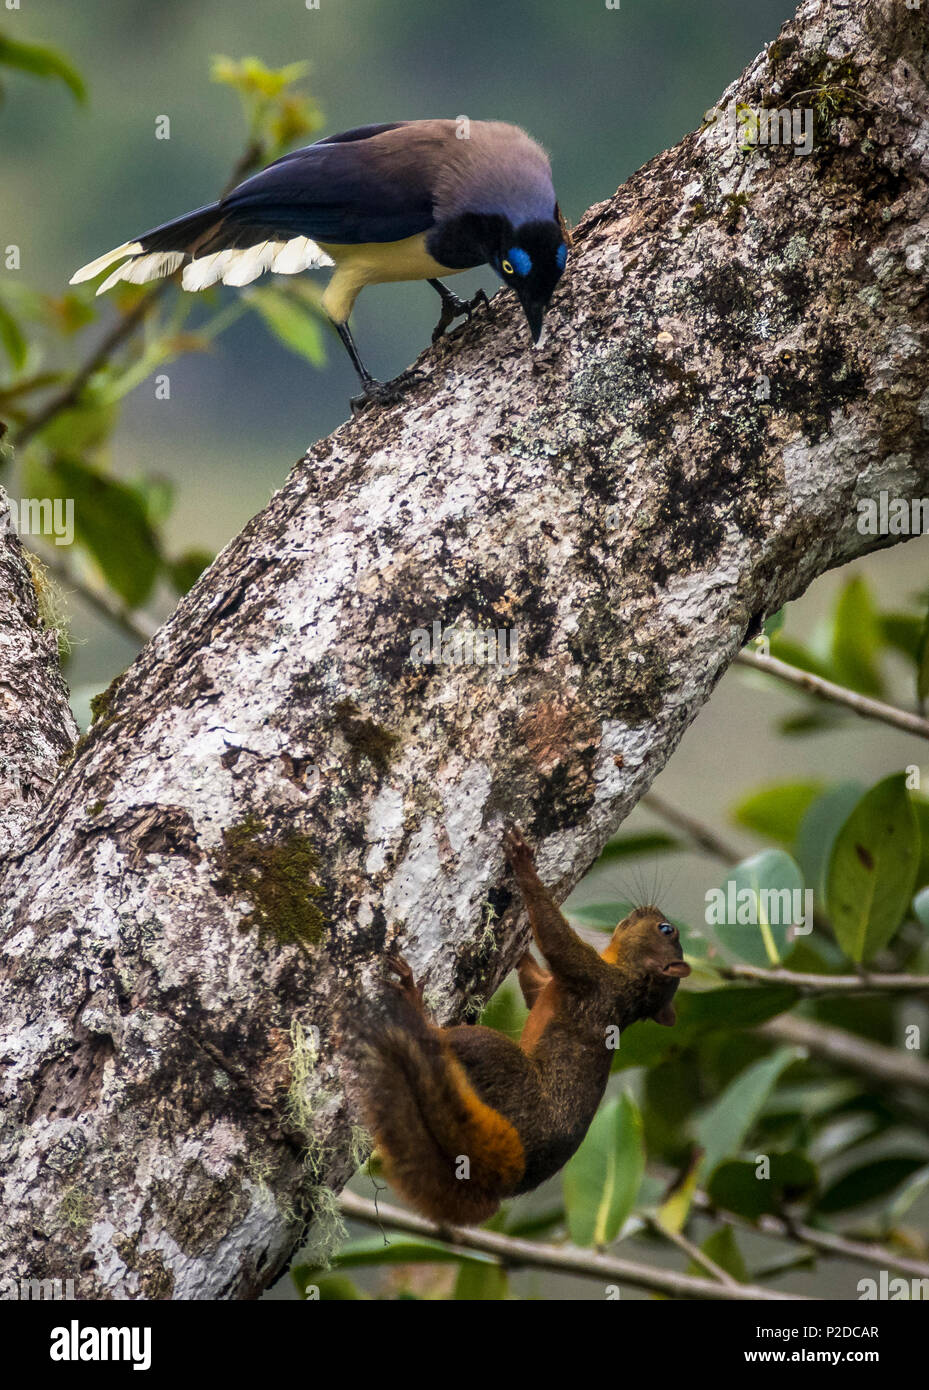 Black chested jay bird and red tailed squirrel in close encounter Stock Photo